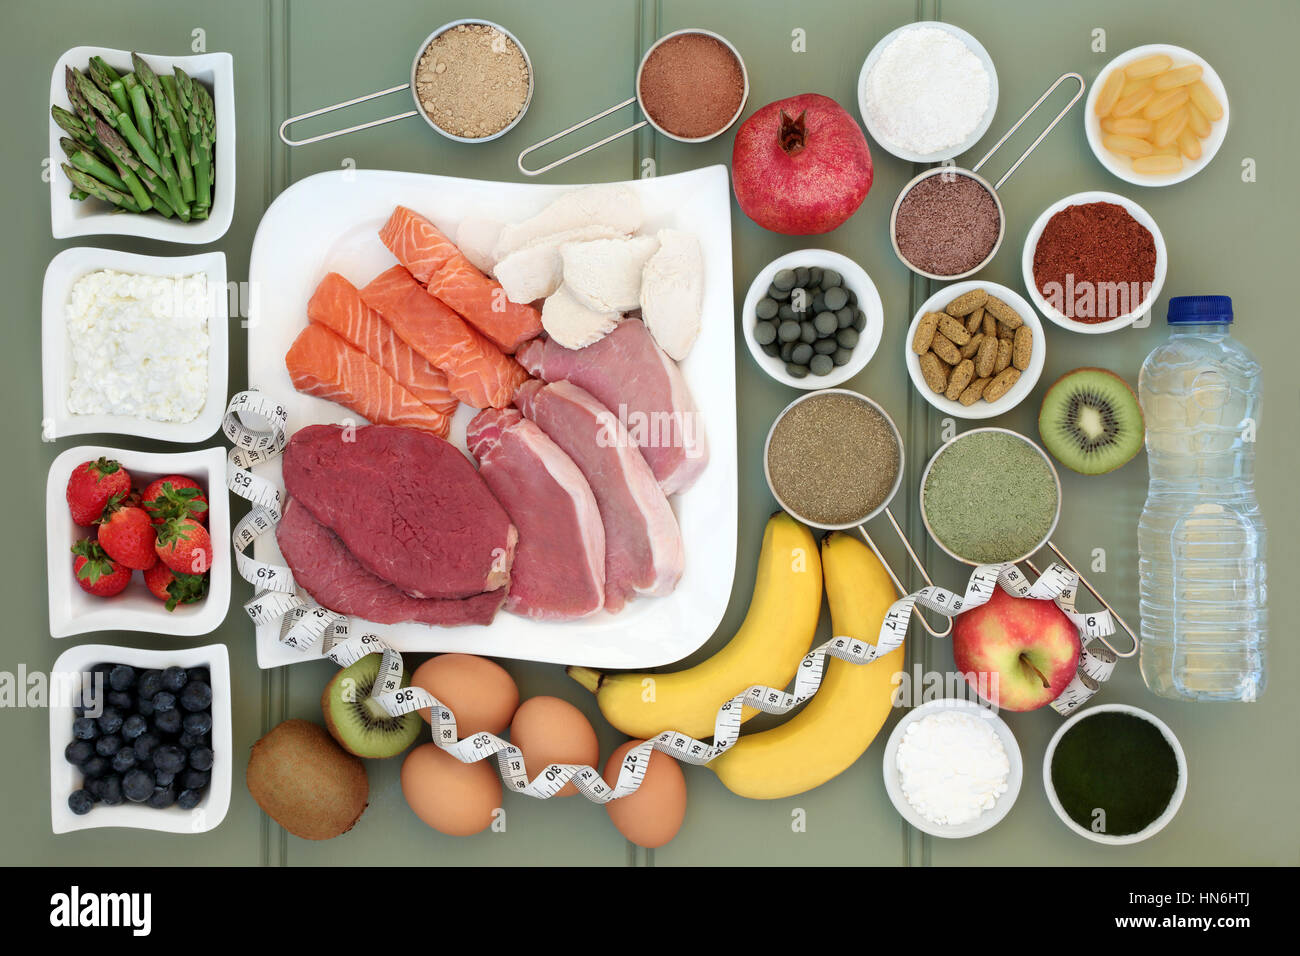 Body building healthy food collection of meat, fish, supplement powders,vitamin pills,fruit, dairy, bottled water and tape measure over slate backgrou Stock Photo